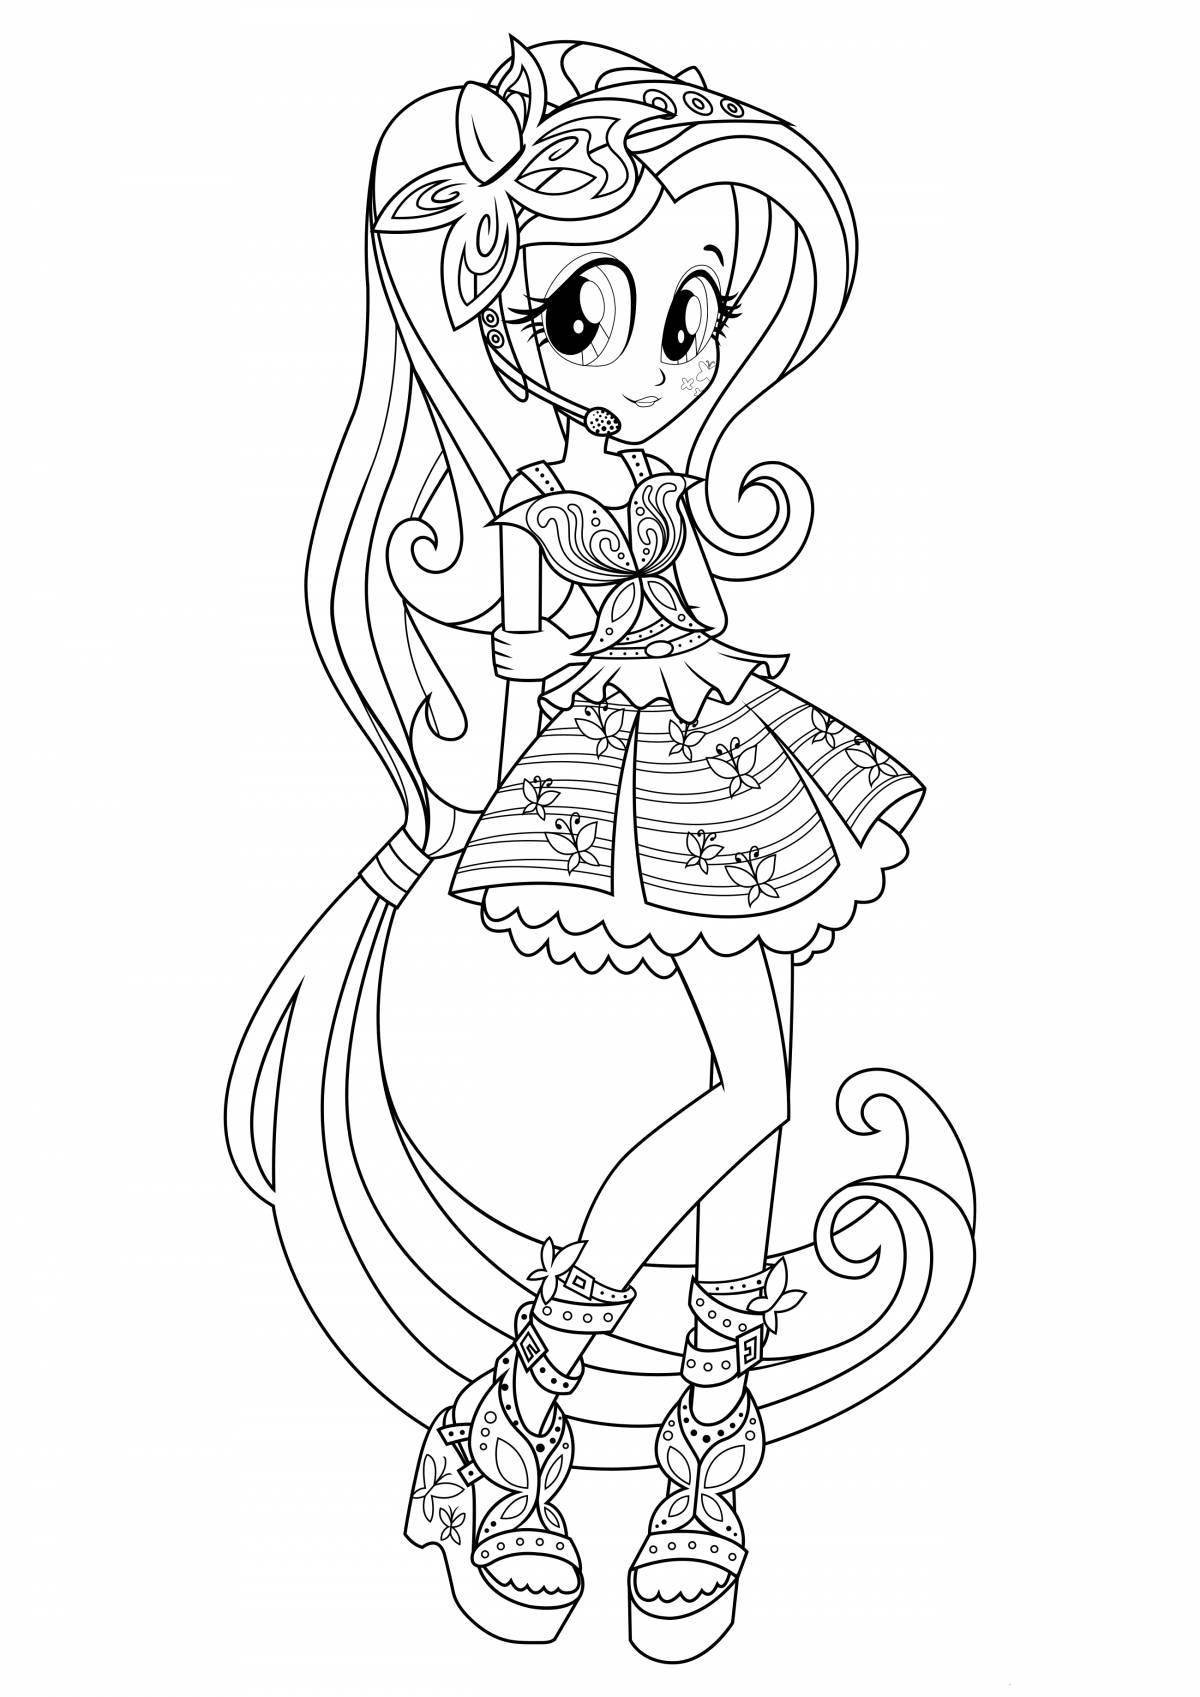 Coloring page adorable pony people